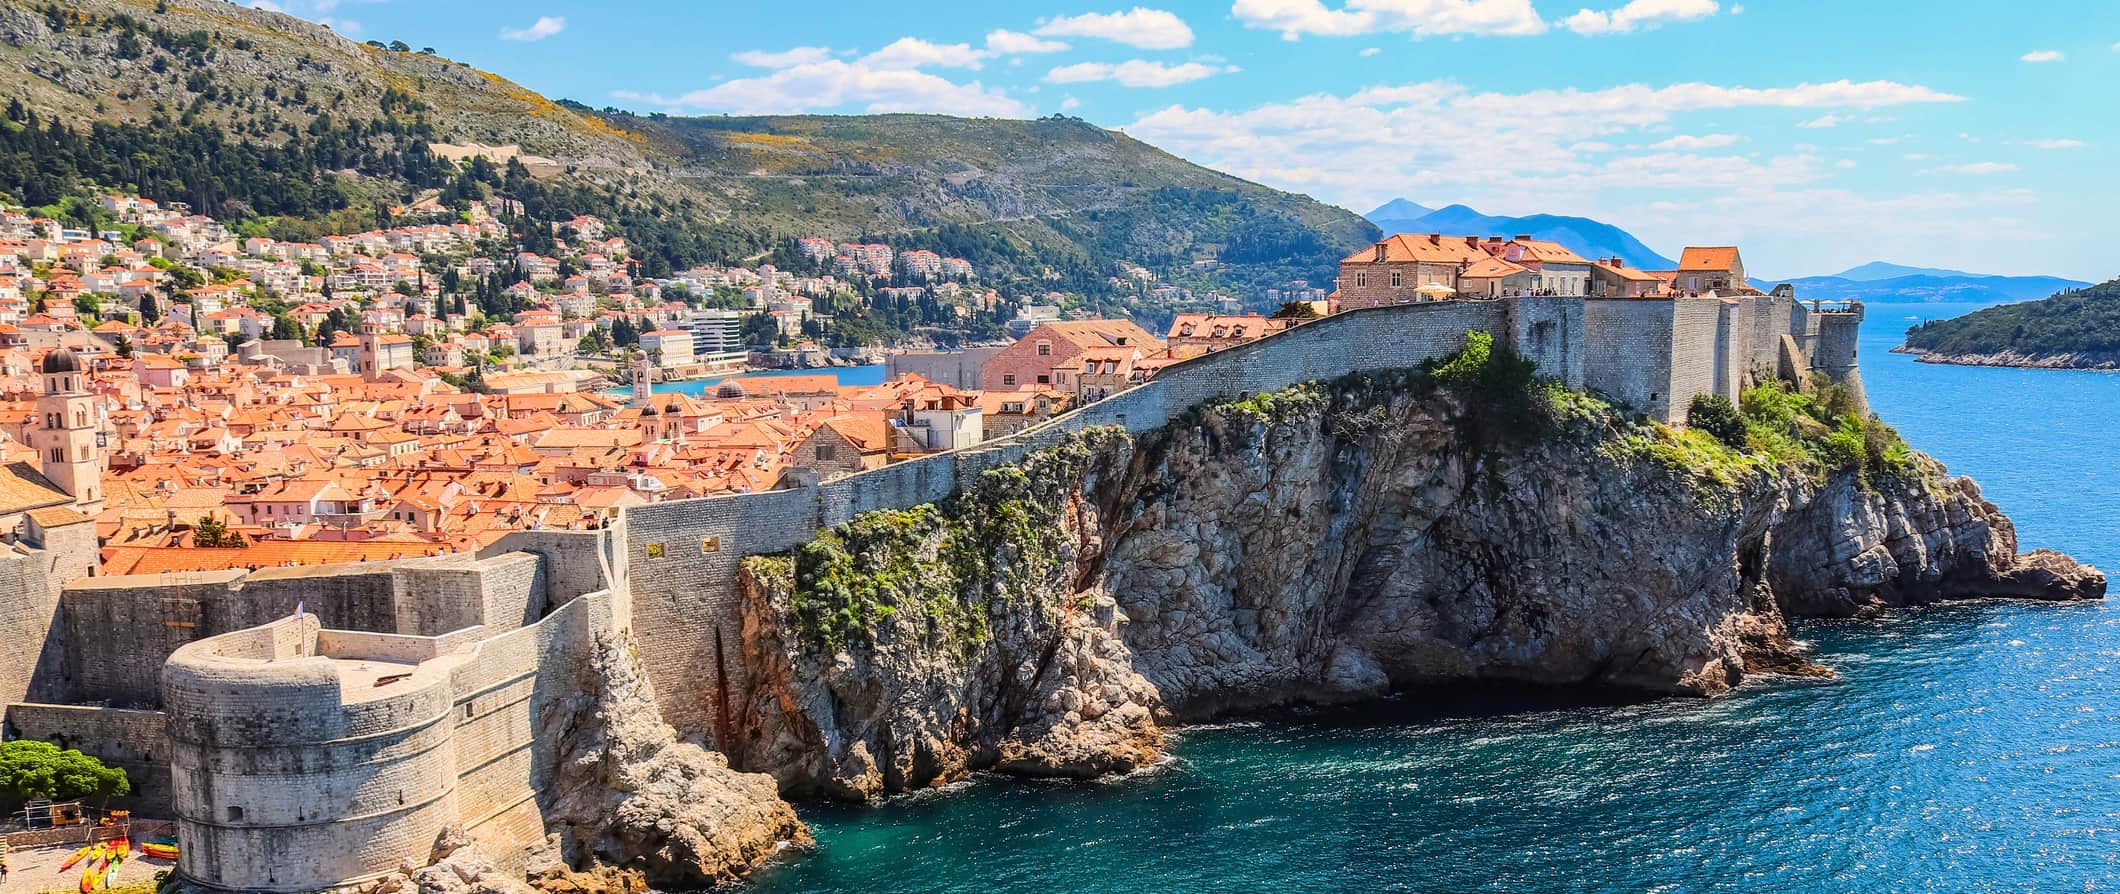 A view overlooking the Old Town of Dubrovnik, Croatia and the old city walls